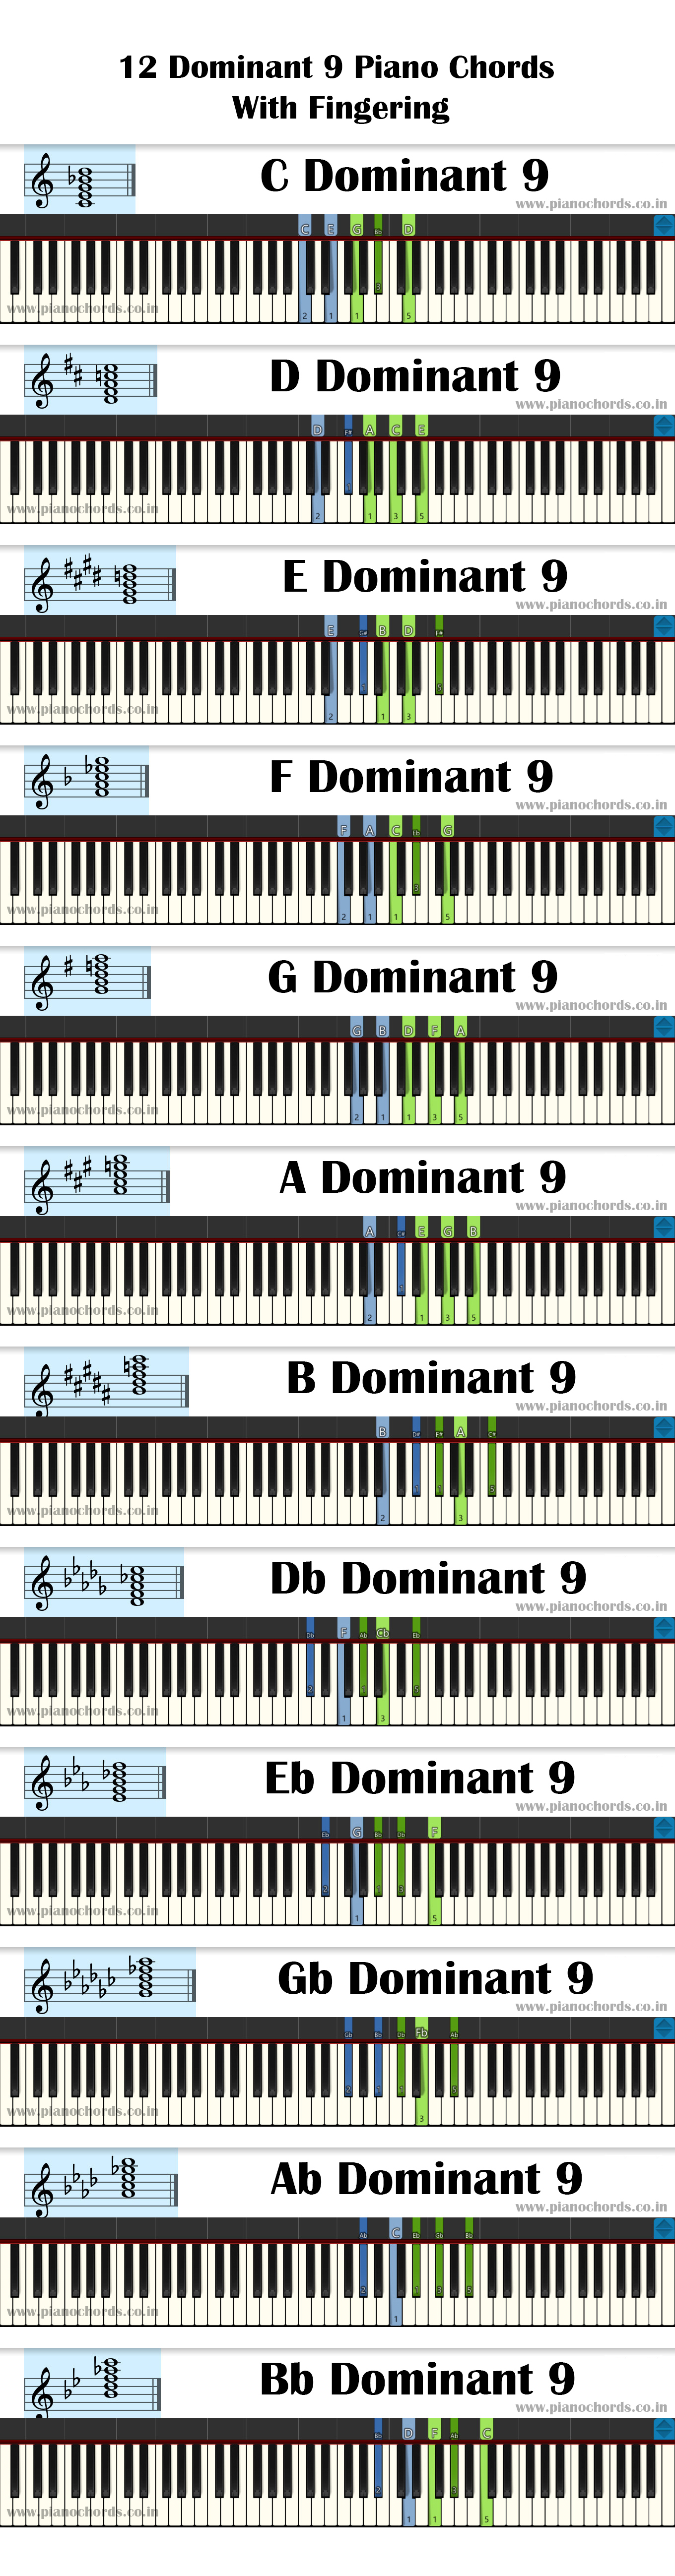 12 Dominant 9 Piano Chords With Fingering, Diagram, Staff Notation